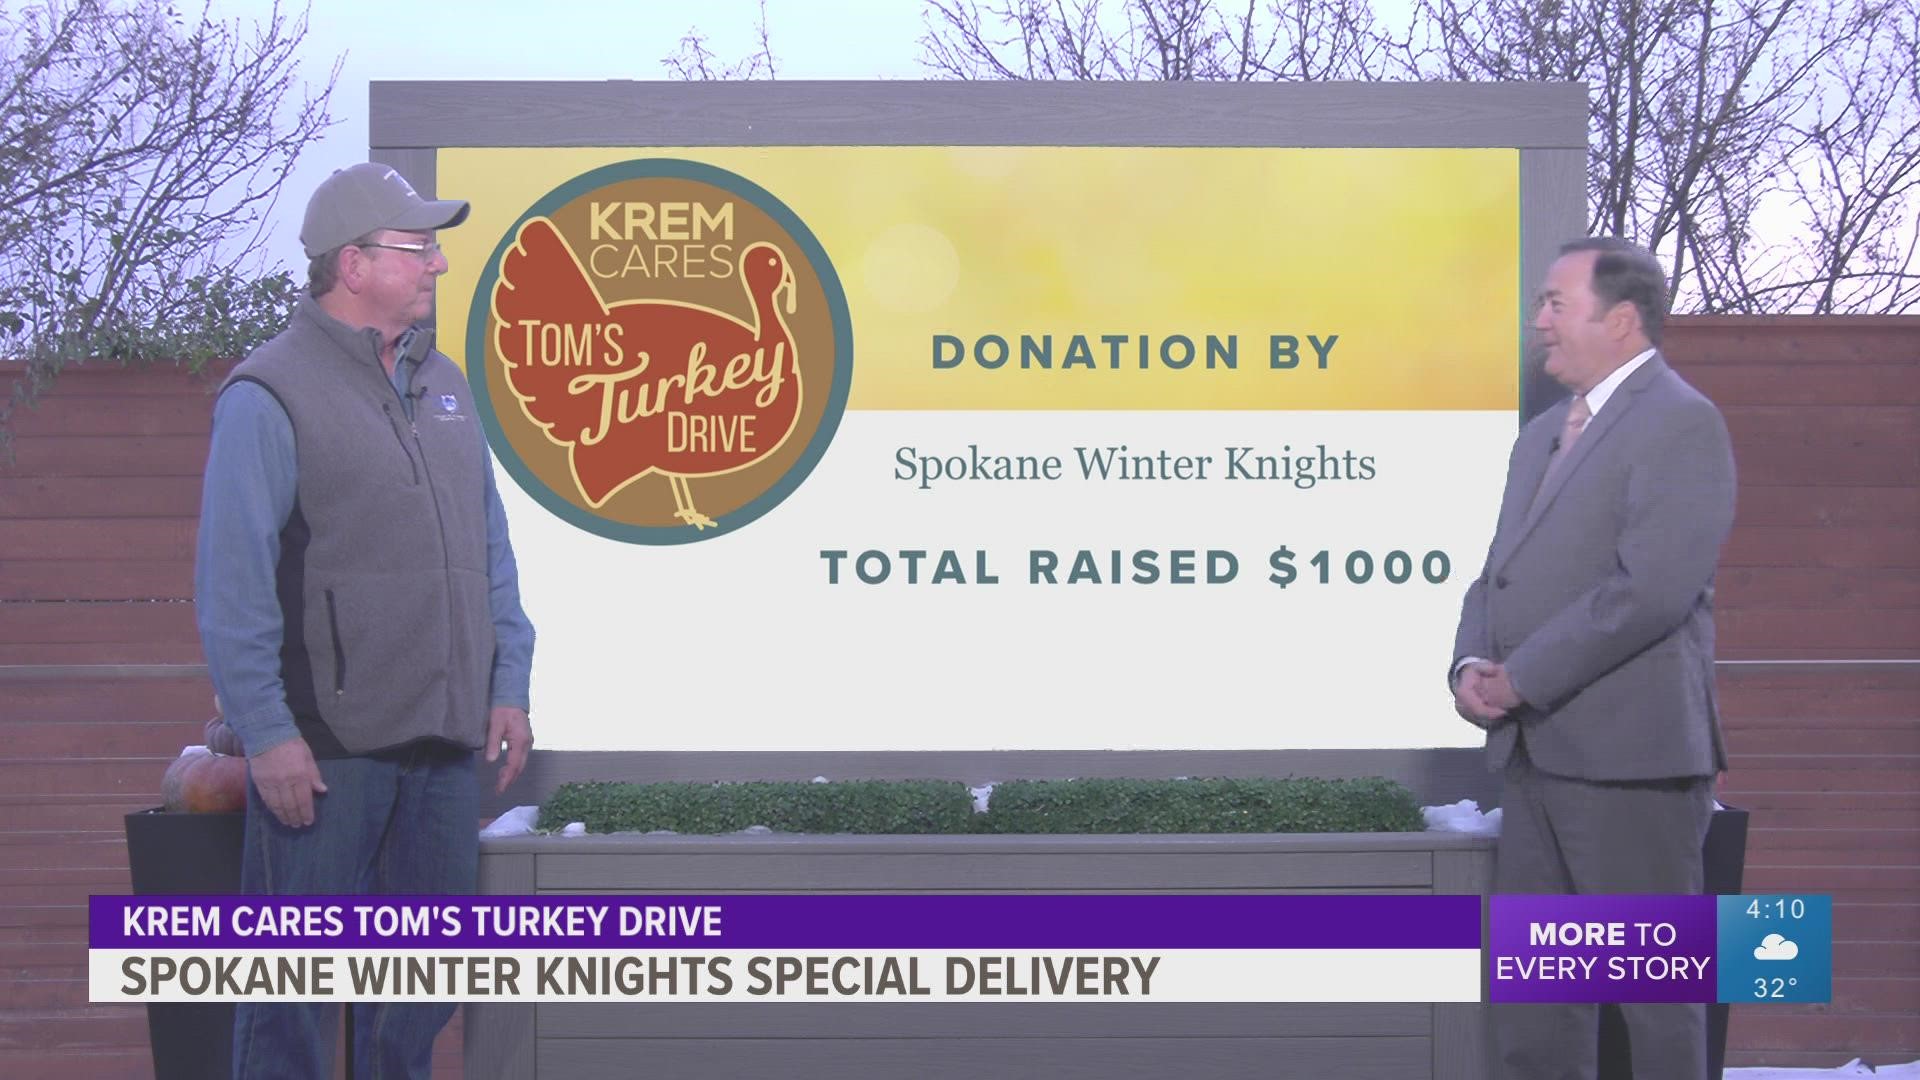 The Spokane Winter Knights Snowmobile Club donated $1000 to Tom's Turkey Drive 2022 to help provide holiday meals to area families for Thanksgiving.